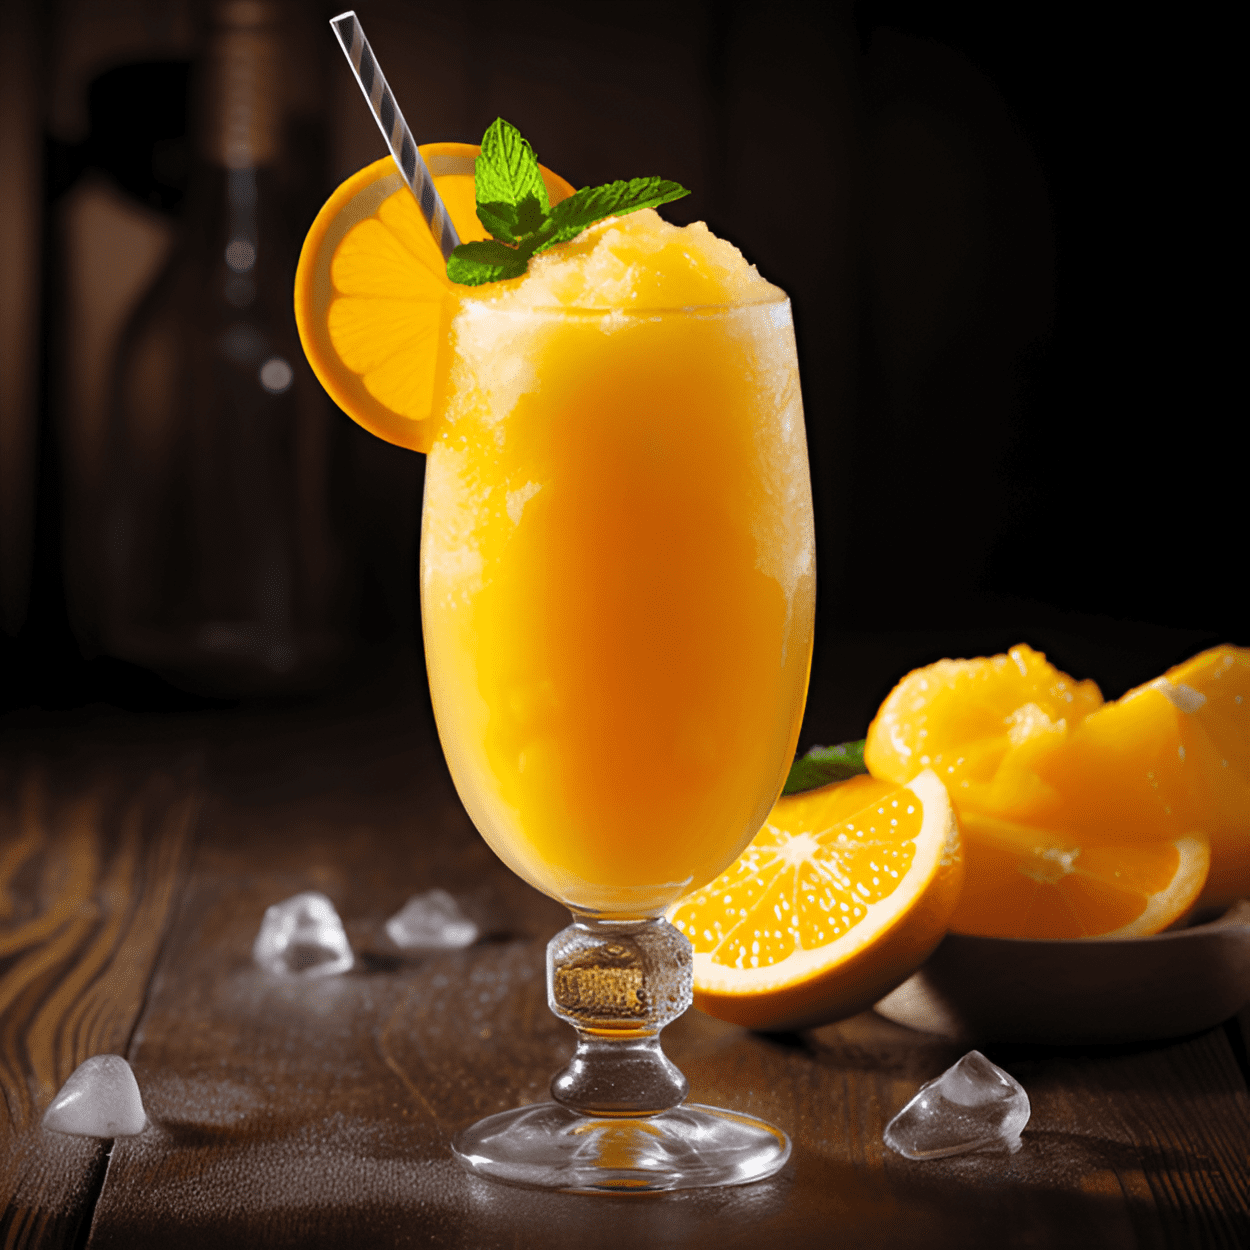 Frozen Screwdriver Cocktail Recipe - The Frozen Screwdriver is a sweet, tangy and refreshing cocktail. The vodka provides a strong, smooth base, while the orange juice adds a sweet and citrusy flavor. The frozen state of the drink adds a cool, slushy texture that's perfect for hot summer days.